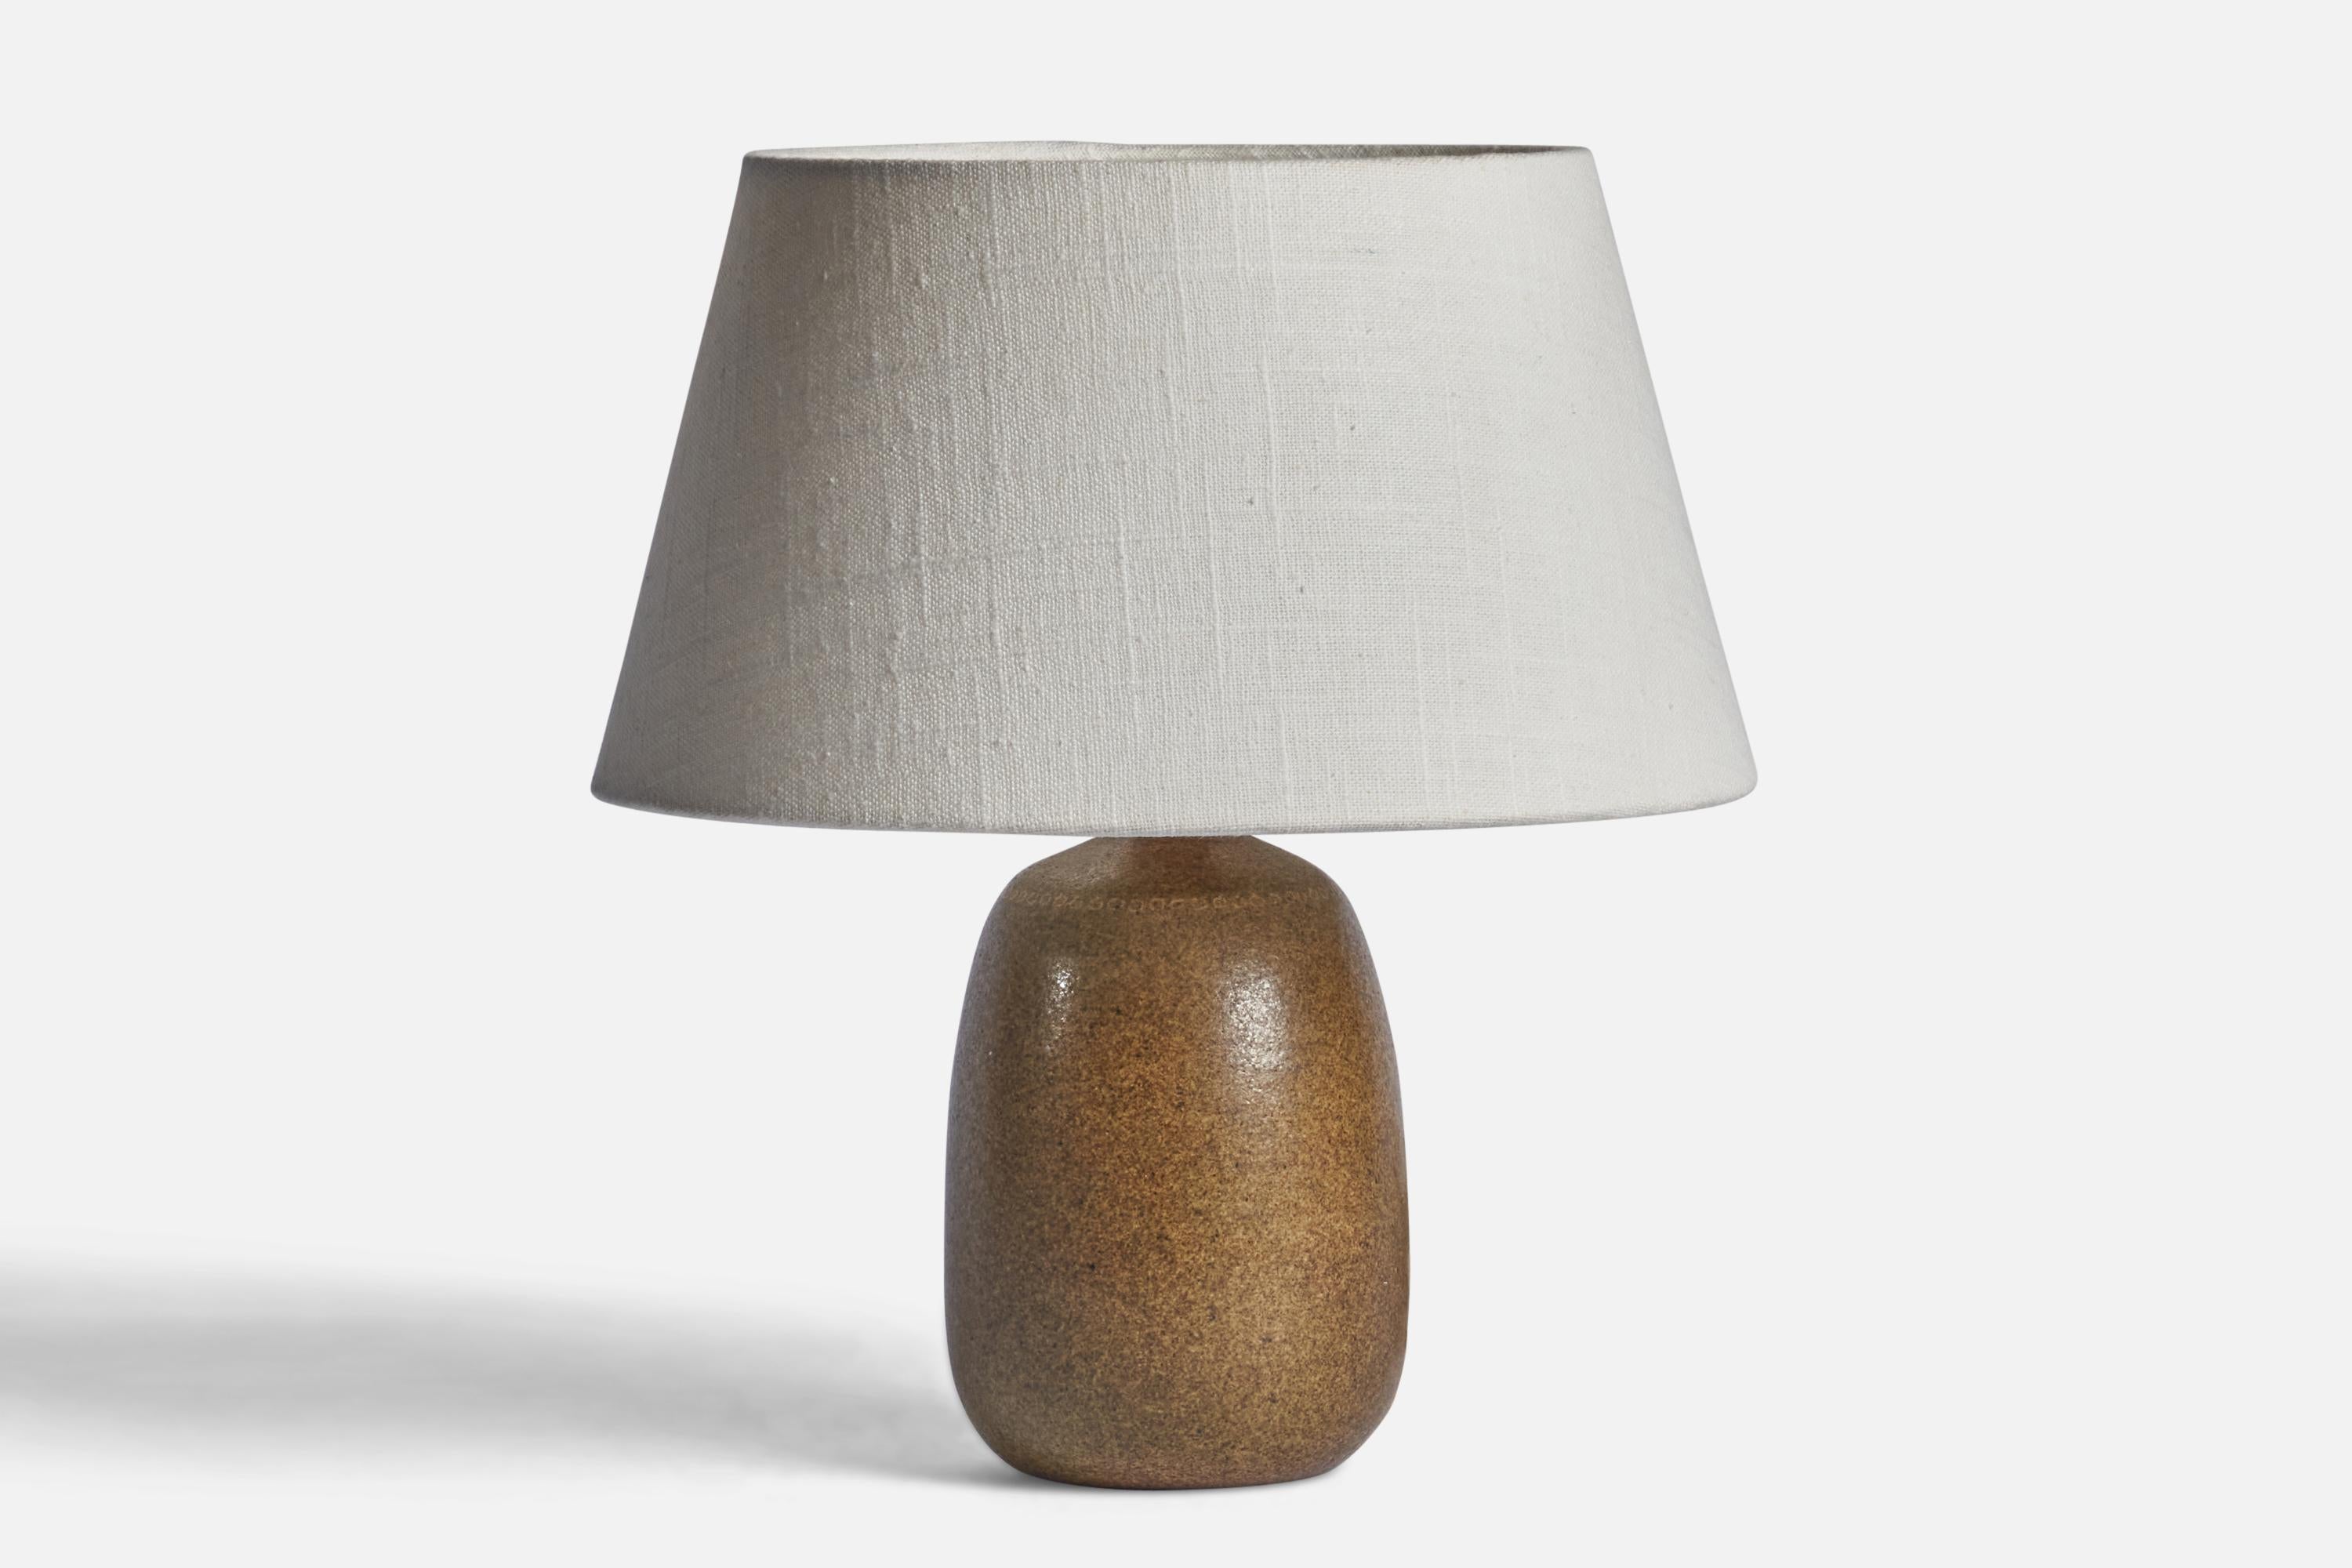 A brown-glazed stoneware table lamp designed and produced in Sweden, 1960s.

Dimensions of Lamp (inches): 8.5” H x 4” Diameter
Dimensions of Shade (inches): 7” Top Diameter x 10” Bottom Diameter x 5.5” H 
Dimensions of Lamp with Shade (inches):